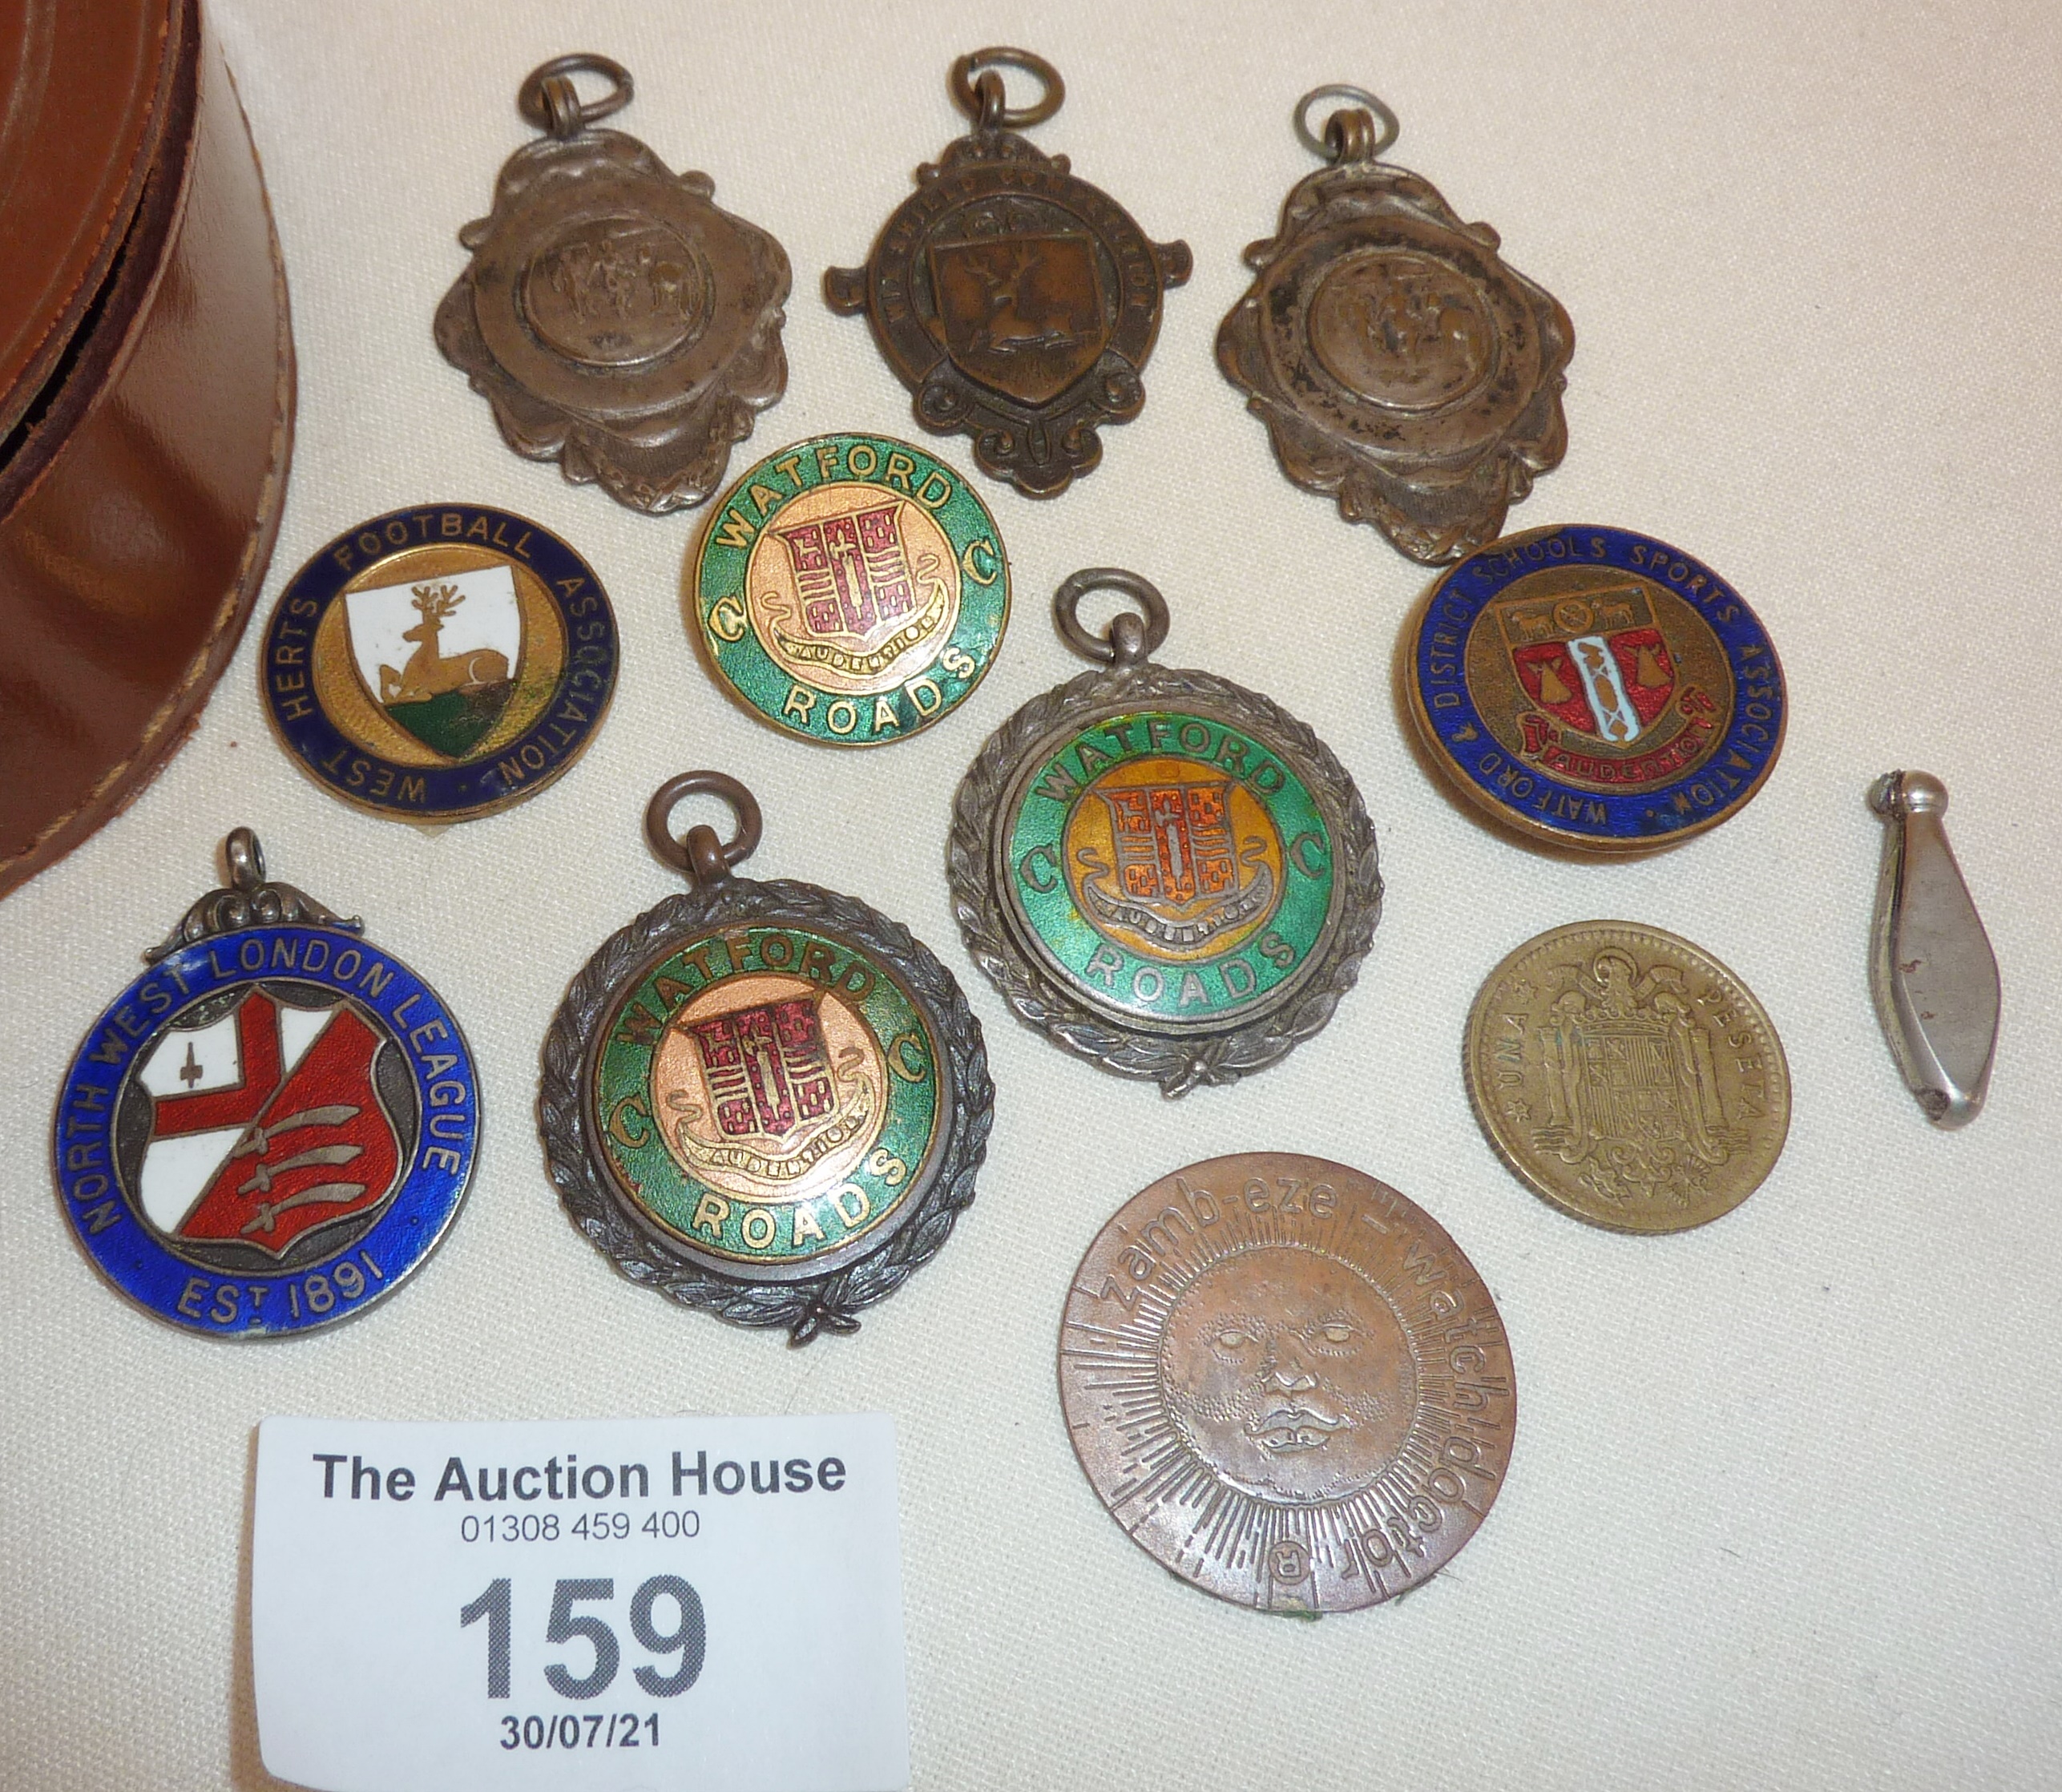 Various enamel sports medals and badges, some football and hallmarked silver